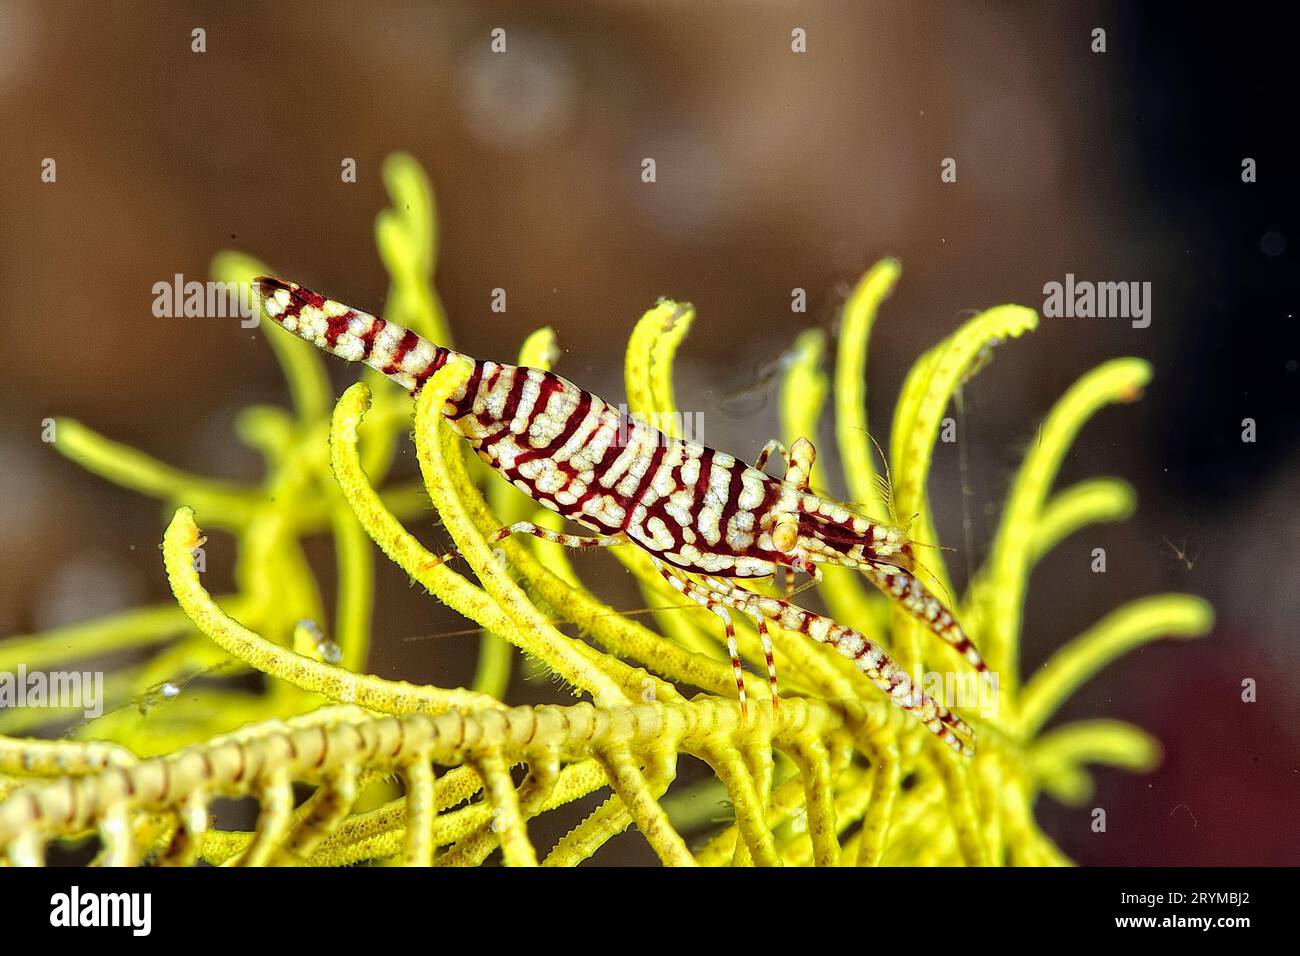 A picture of a Feather star shrimp Stock Photo